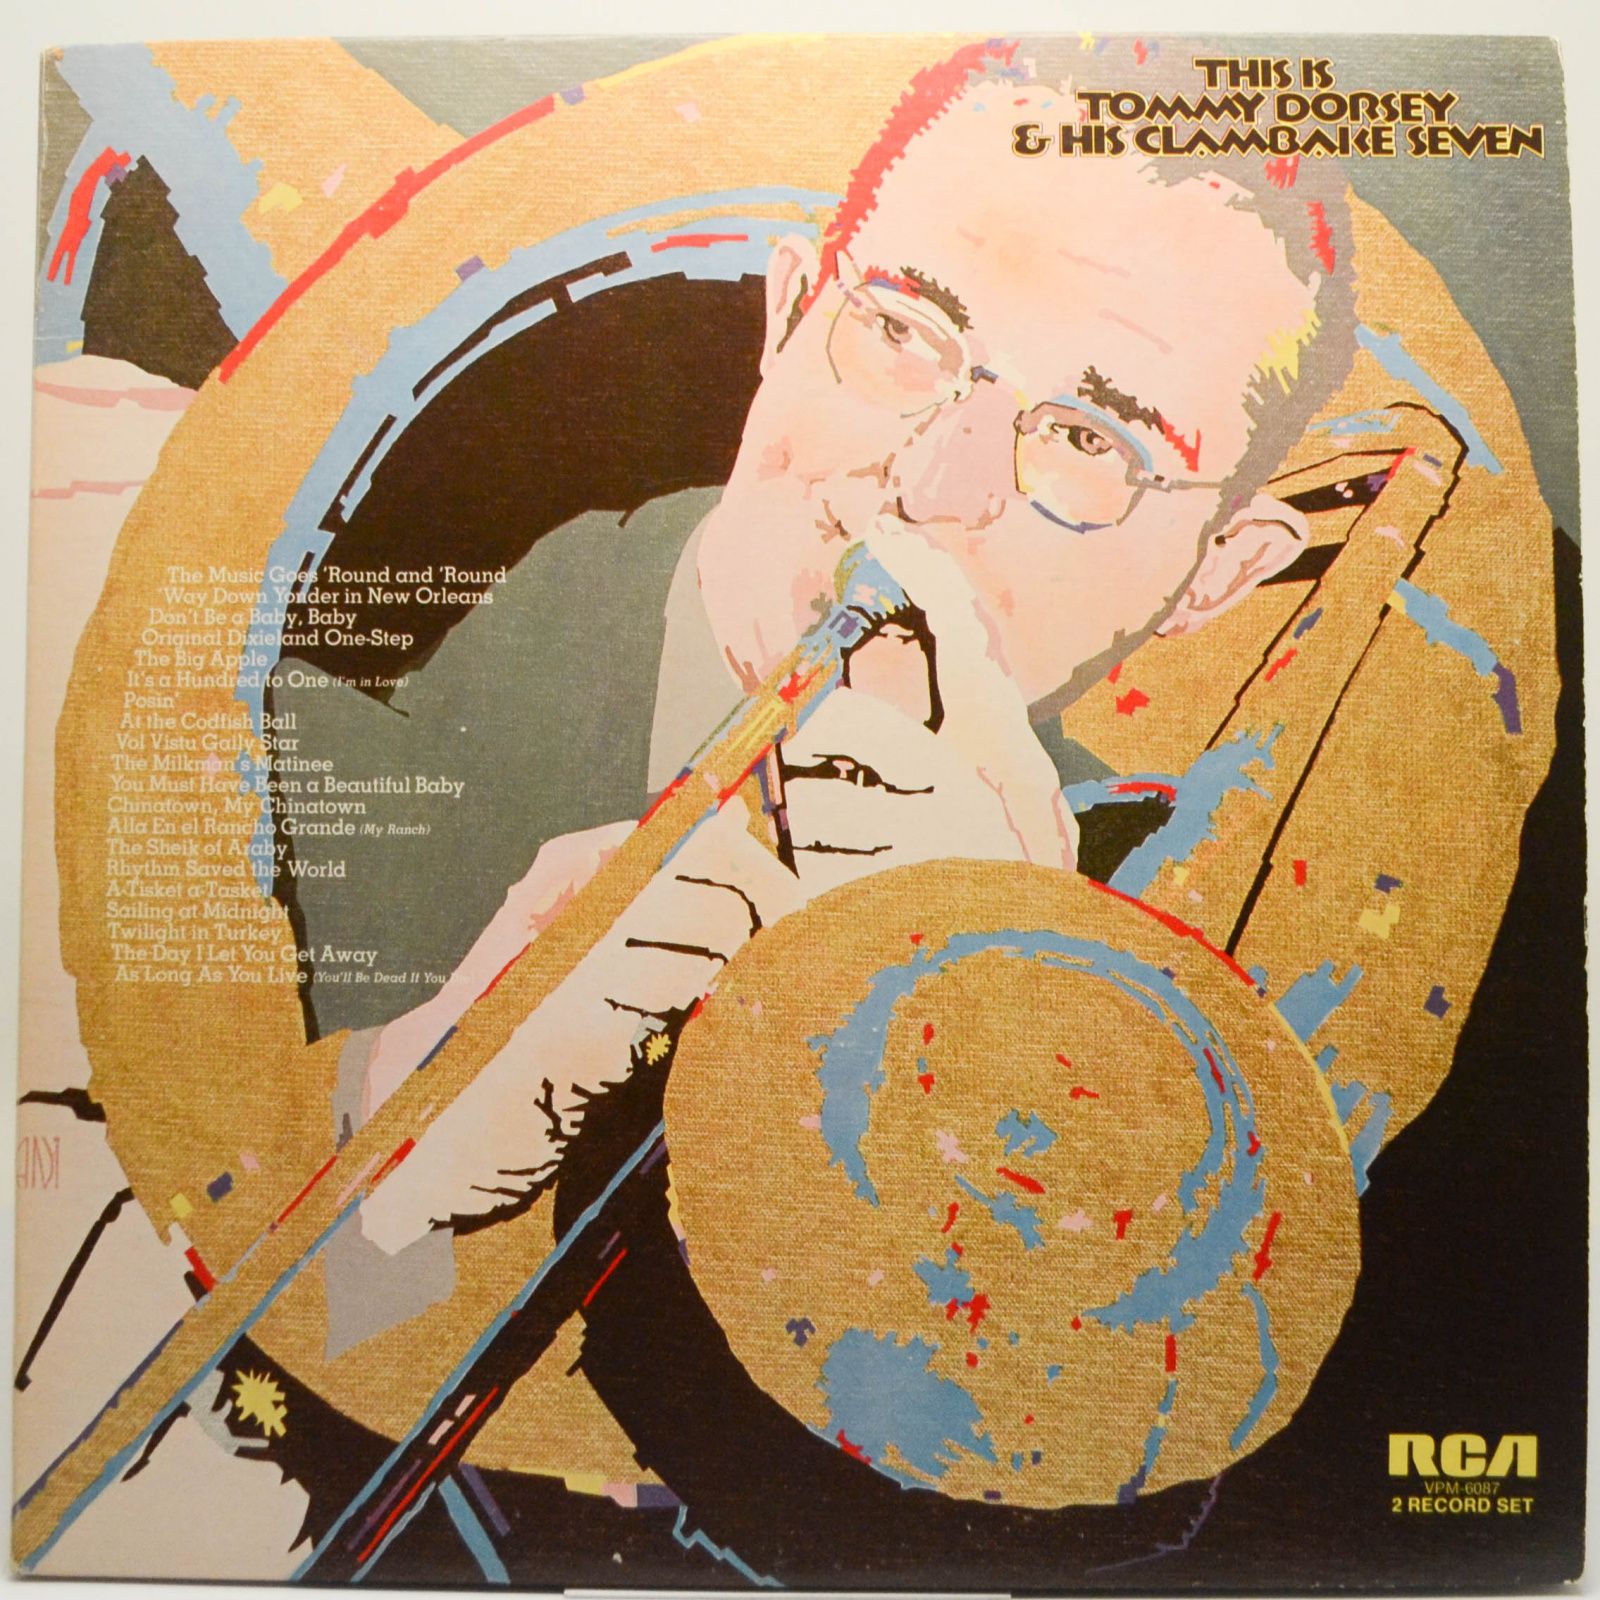 This Is Tommy Dorsey & His Clambake Seven (2LP), 1973